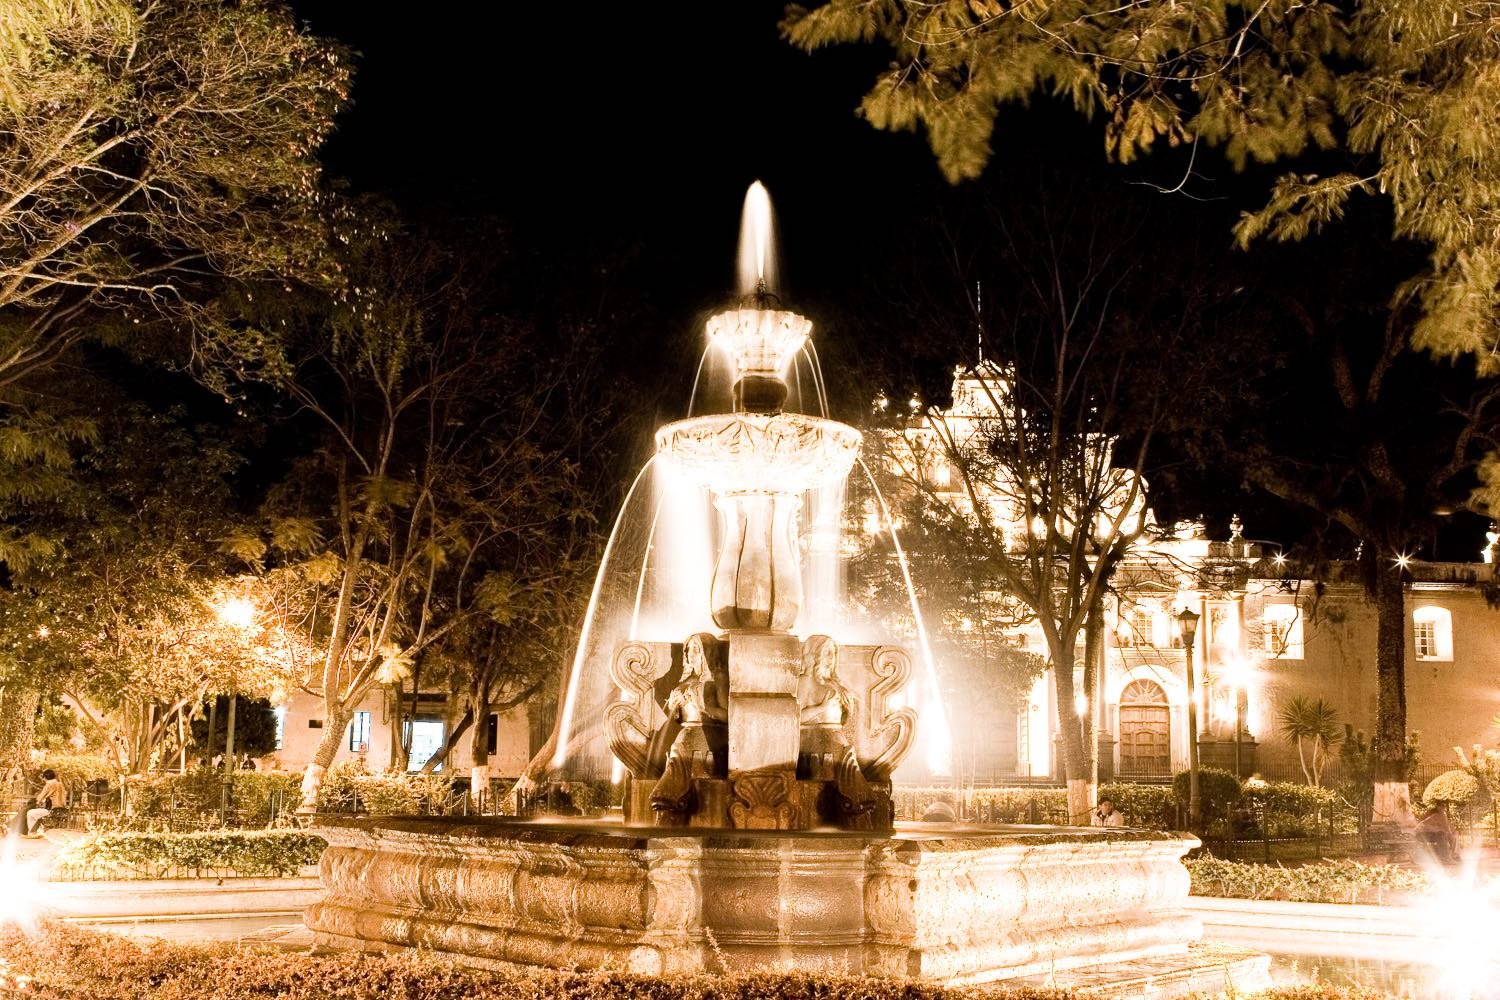 Visit Antigua: Private Vacation Packages to Guatemala | LANDED Travel